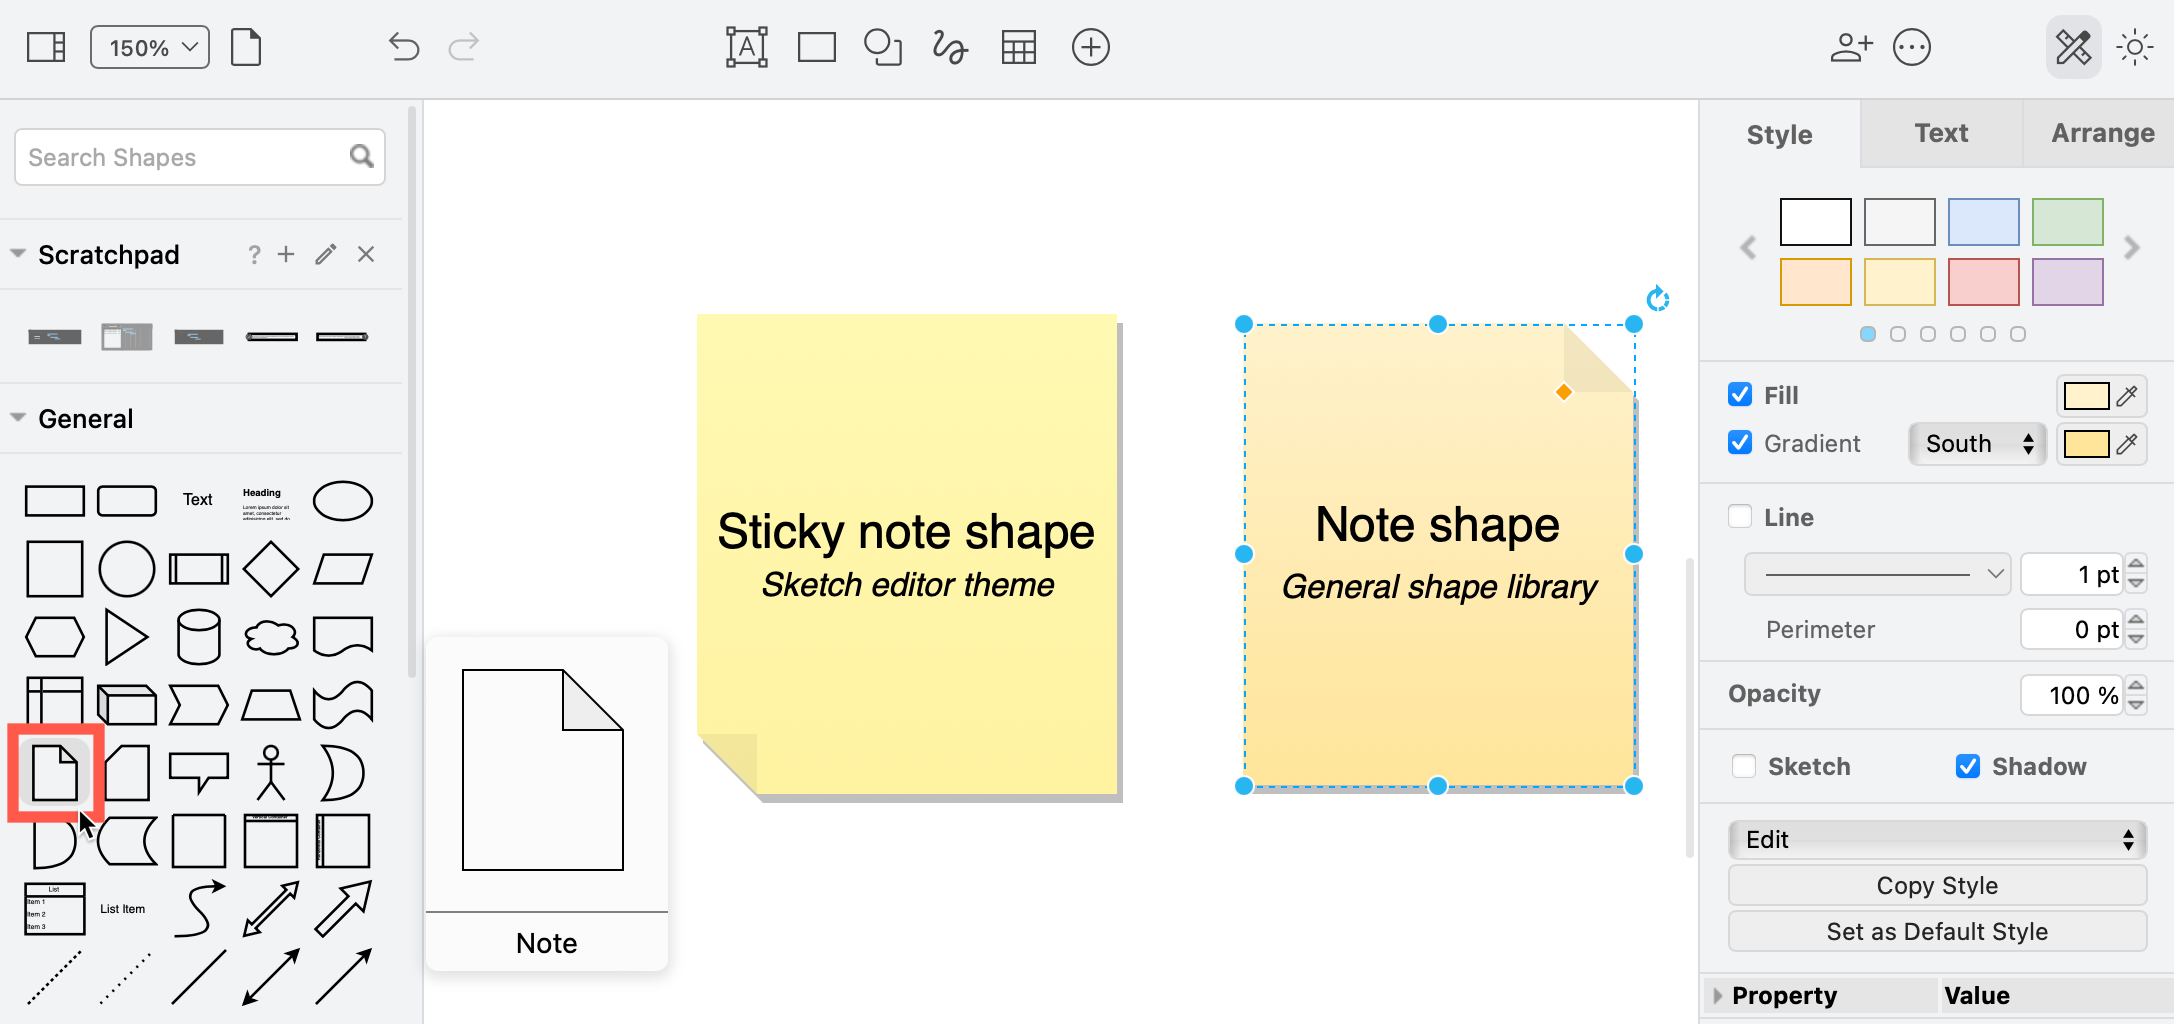 Use the sticky note shape in the Sketch editor theme, or style the Note shape from the General shape library